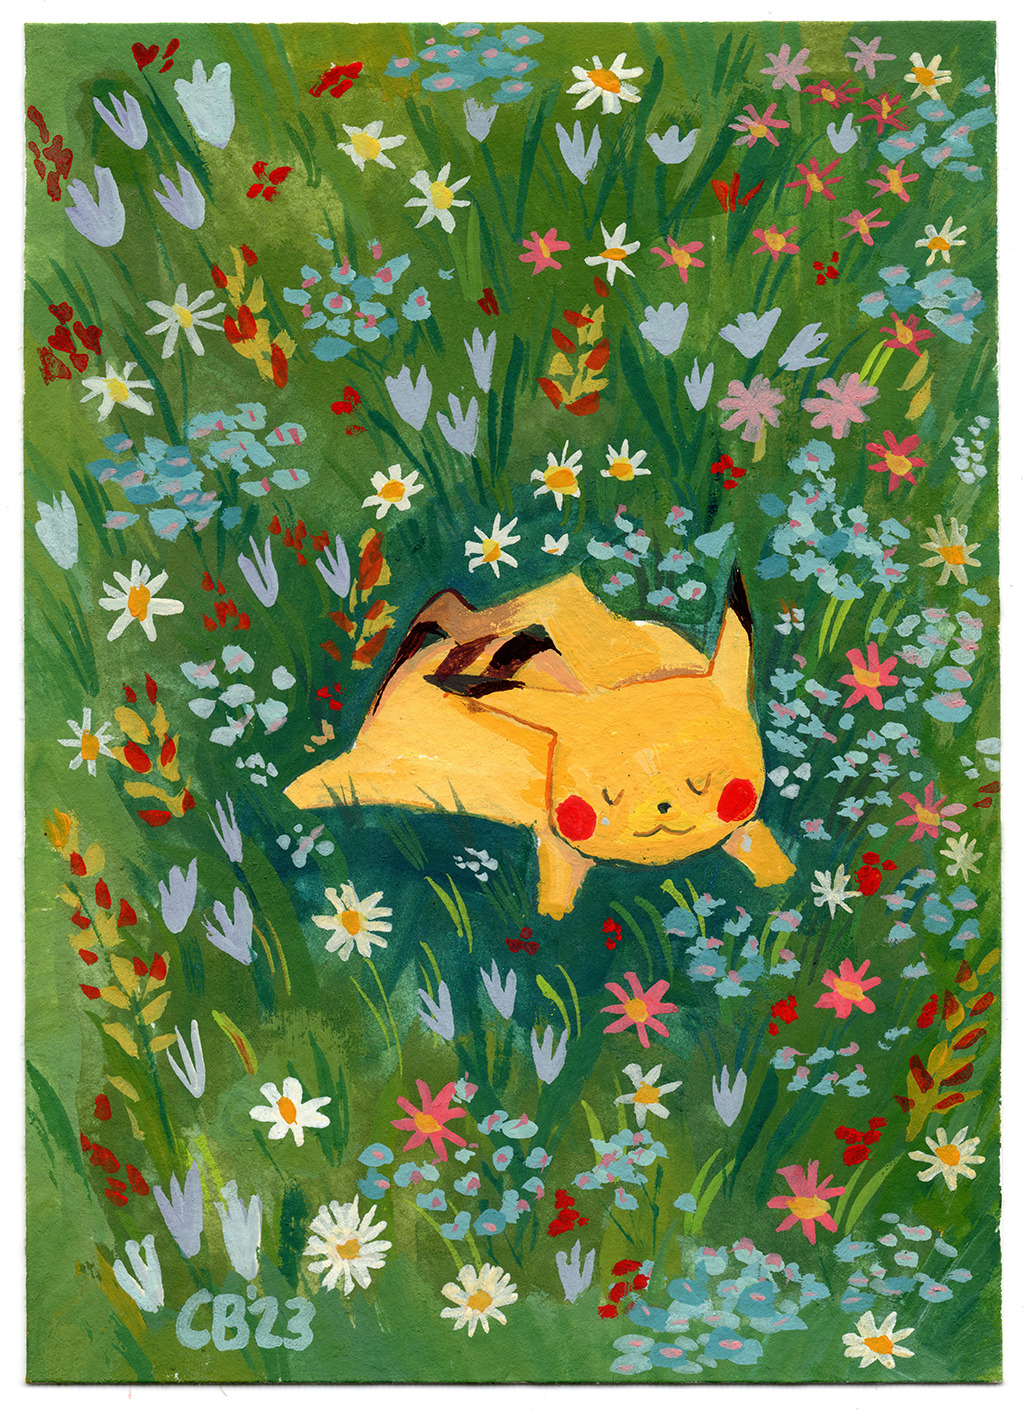 C'S ART BLOG! — pikachu napping and oddish in the tall